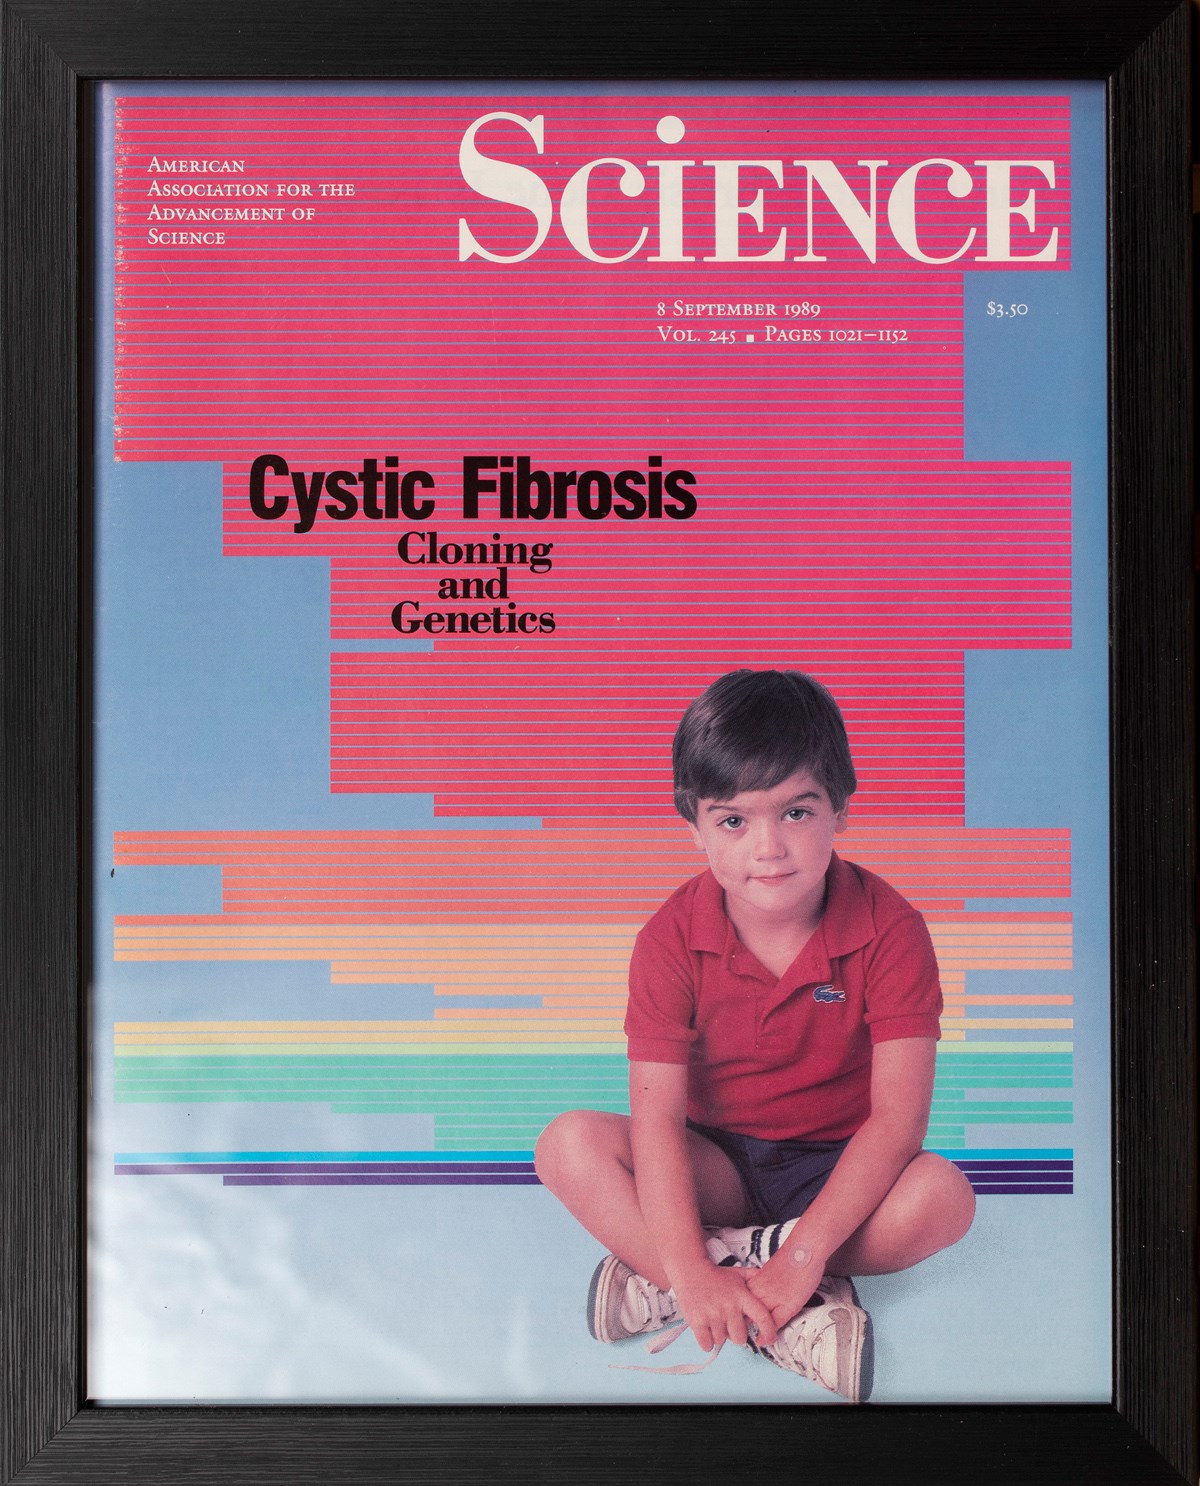 The cover of volume 245 of the journal 'Science'. The cover depicts a child sitting cross-legged in front of a rainbow coloured background. The subtitle reads "Cystic Fibrosis: Cloning and Genetics".